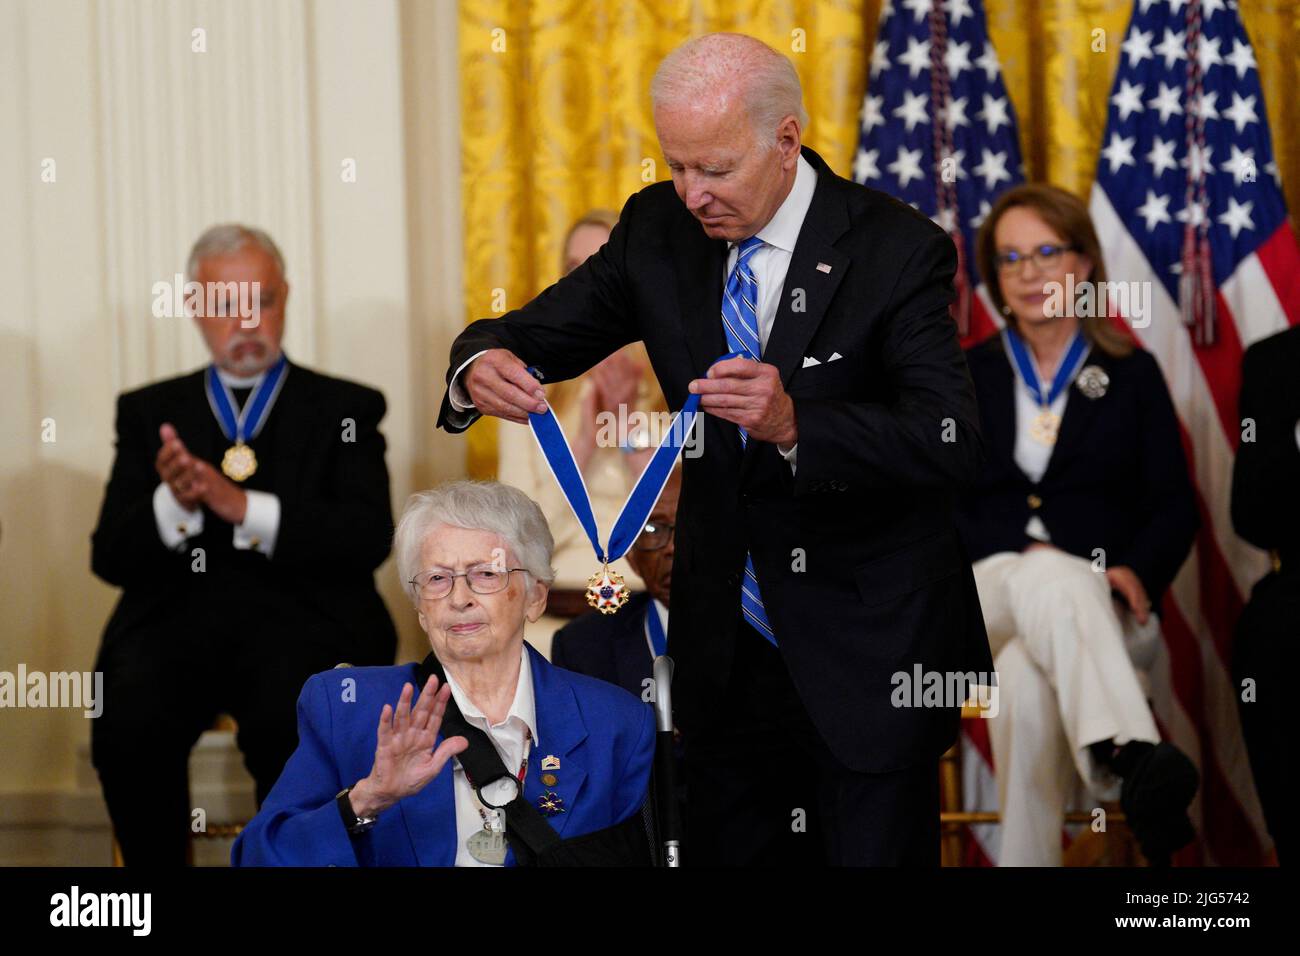 Washington, US, July 7, 2022. U.S. President Joe Biden awards the Presidential Medal of Freedom to retired Air Force Brigadier General Wilma Vaught in the East Room at the White House in Washington on July 7, 2022. Photo by Yuri Gripas/ABACAPRESS.COM Stock Photo